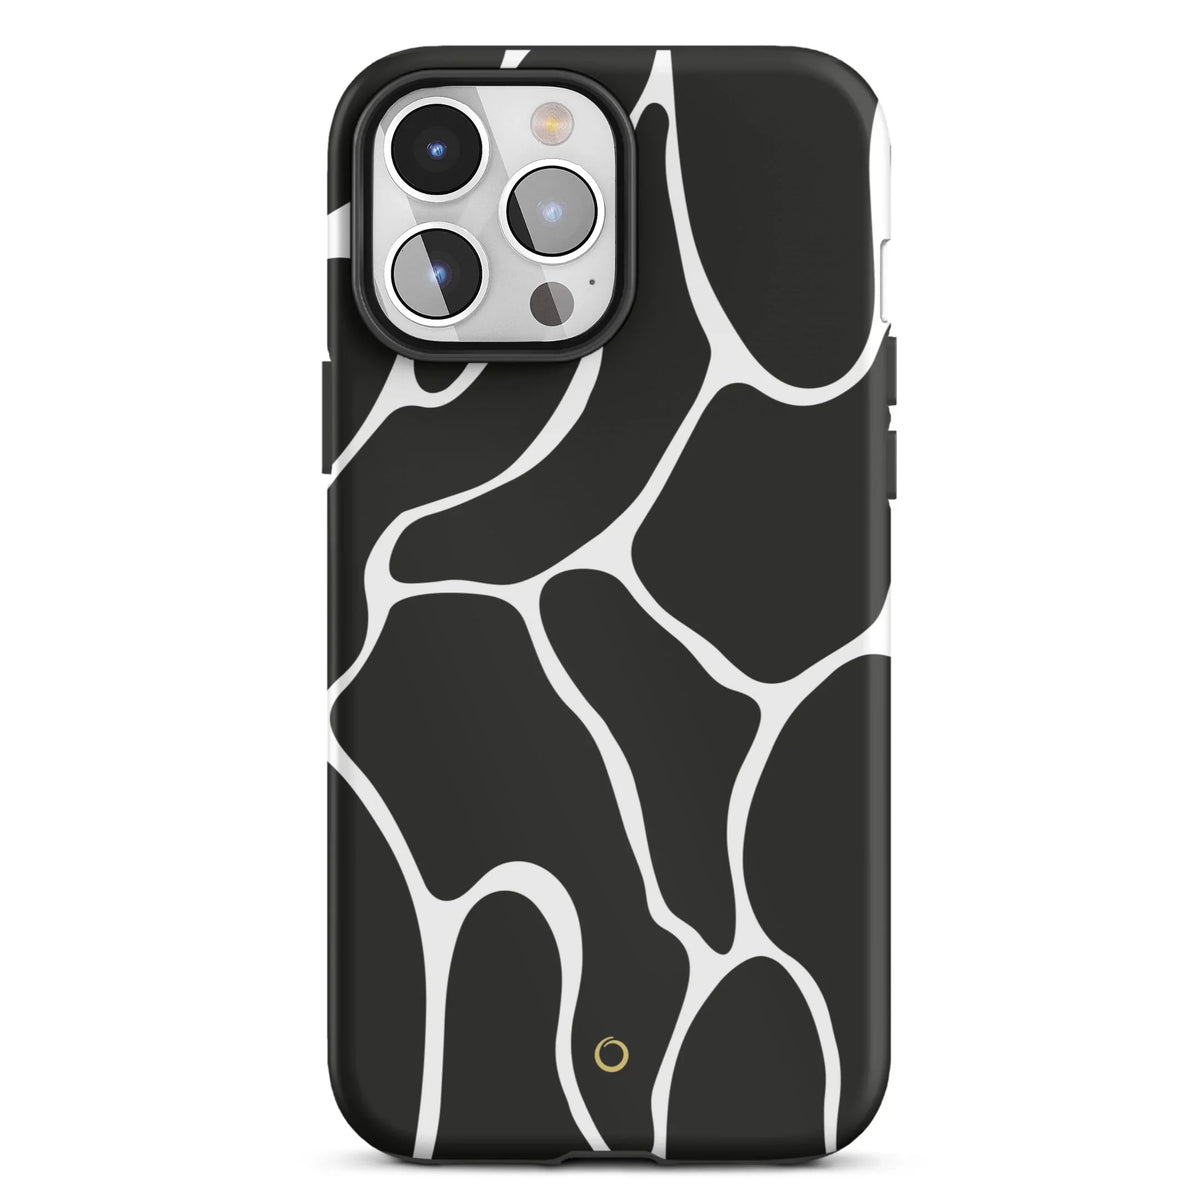 Wavy White Lines iPhone Case - iPhone 11 Pro Max